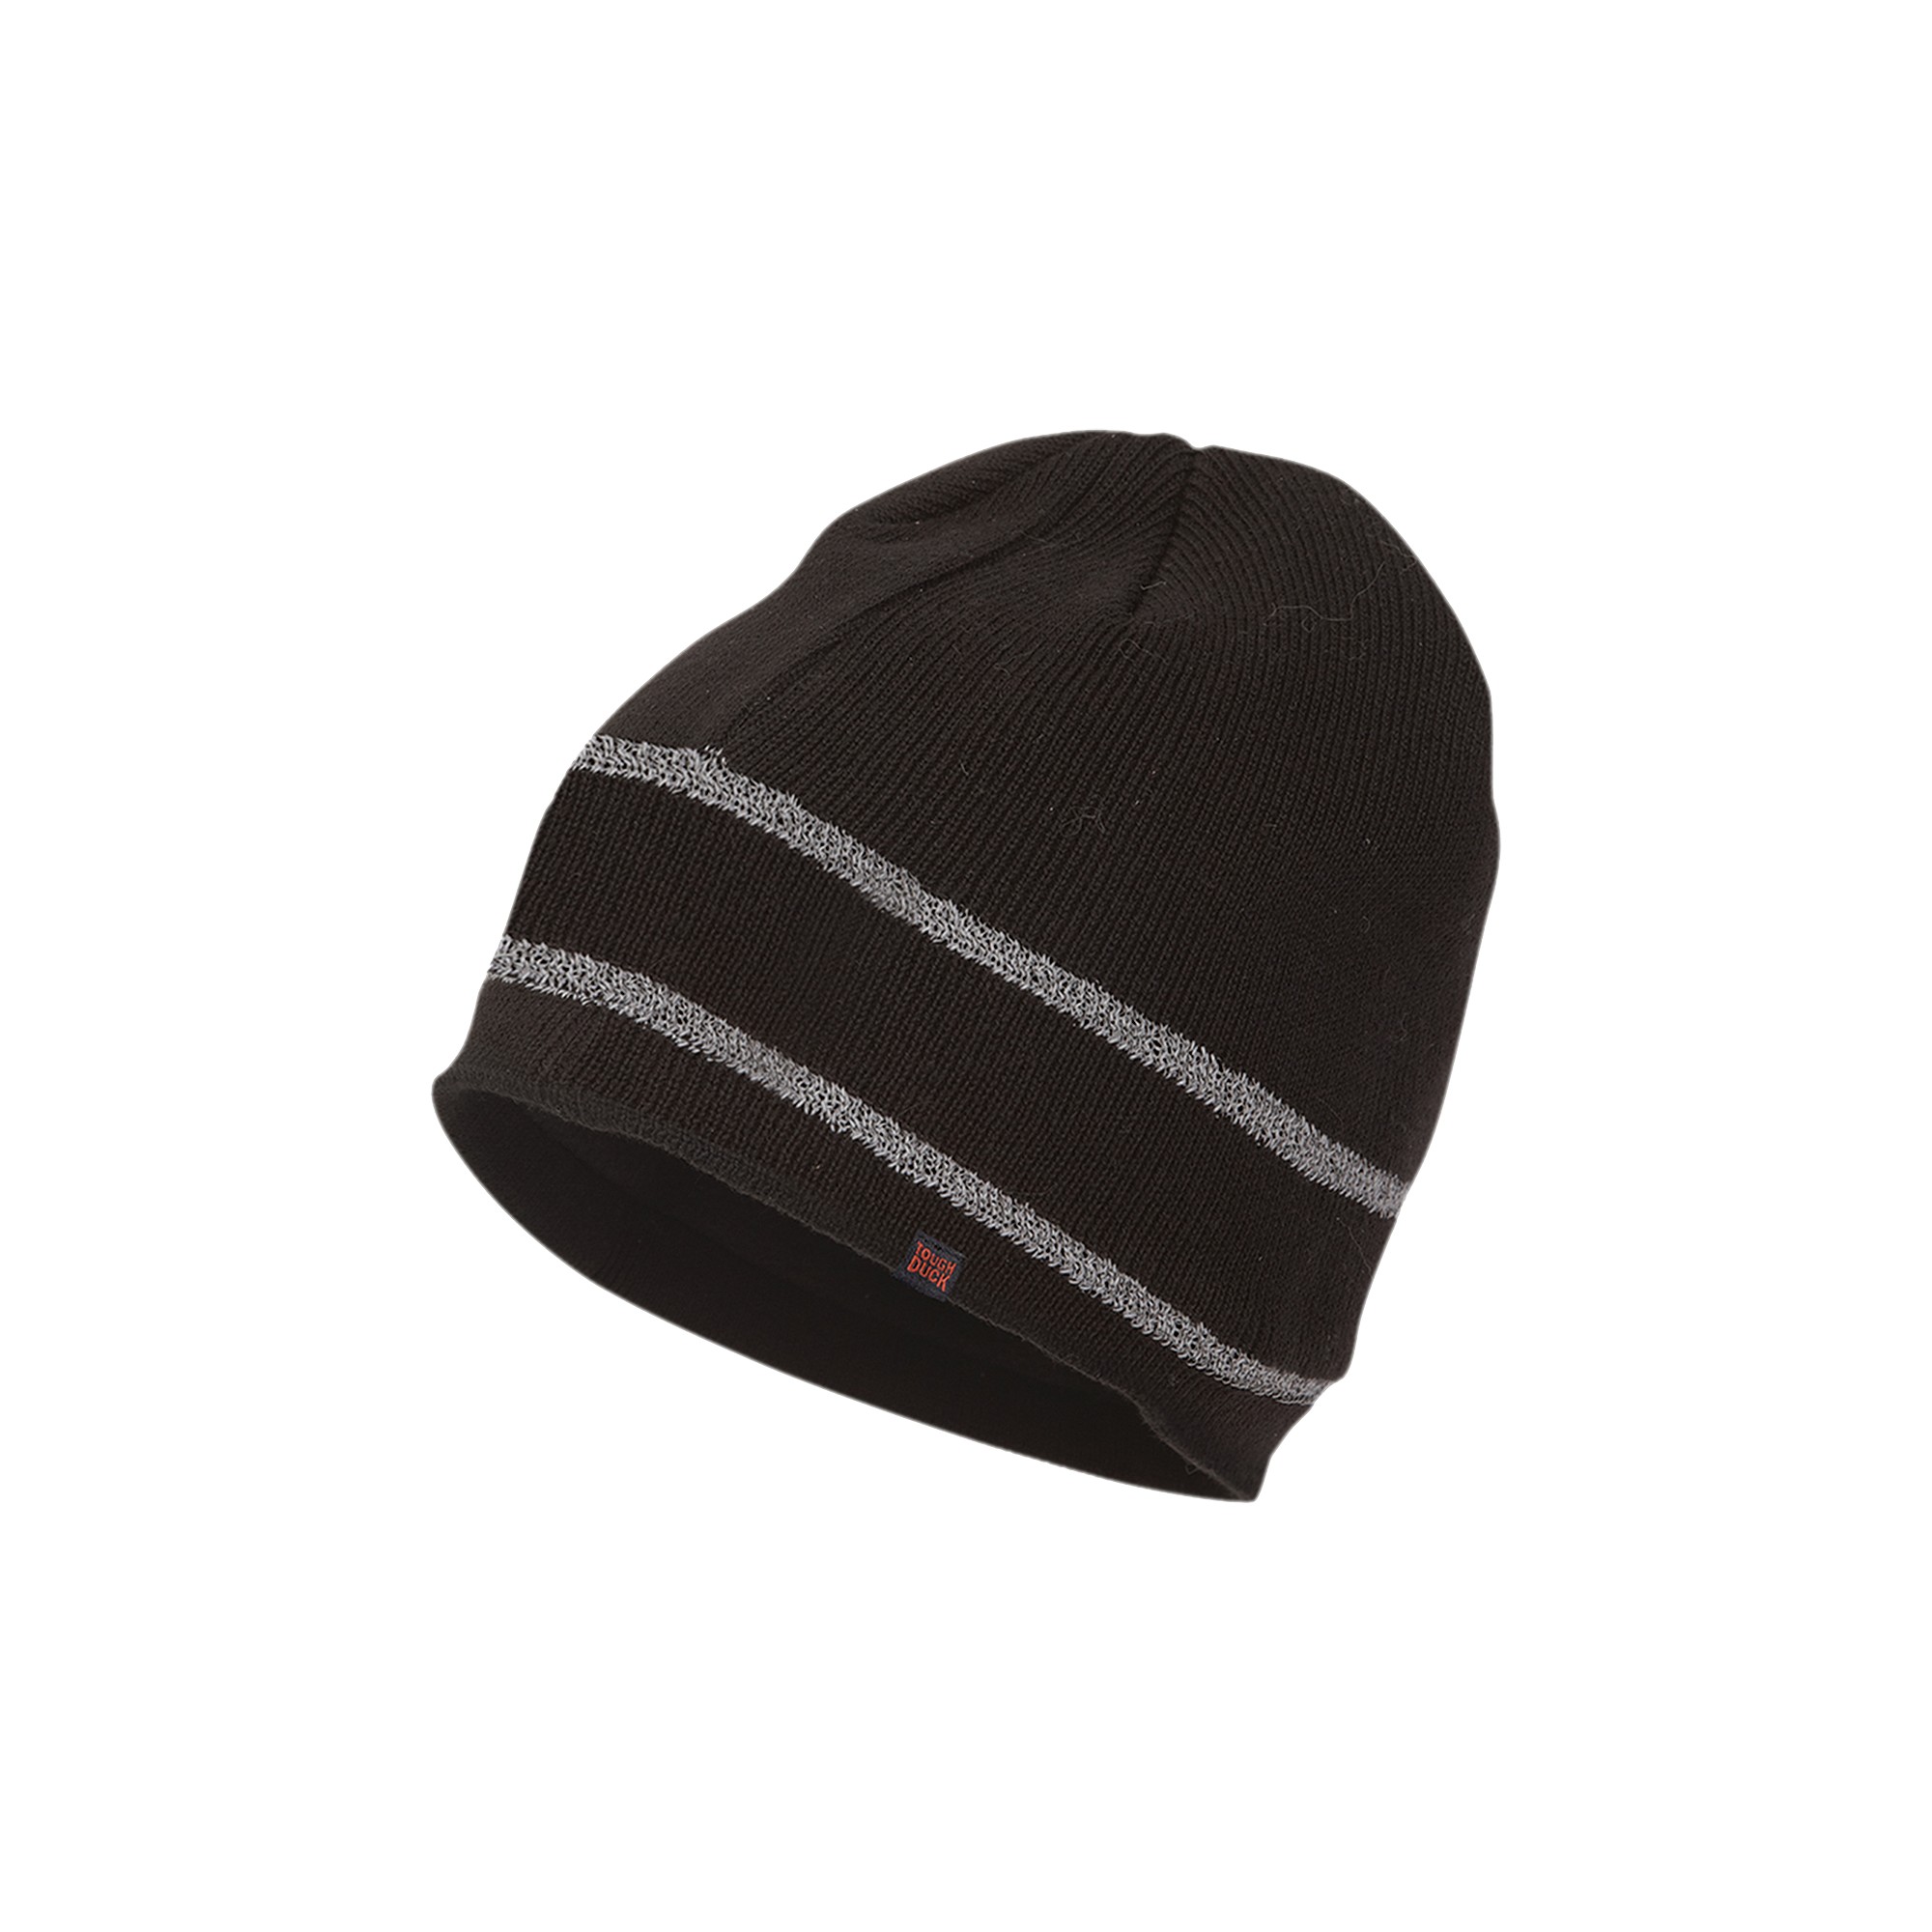 AMP_CA | Tough Duck Acrylic Knit Touque w/ Reflective Striping